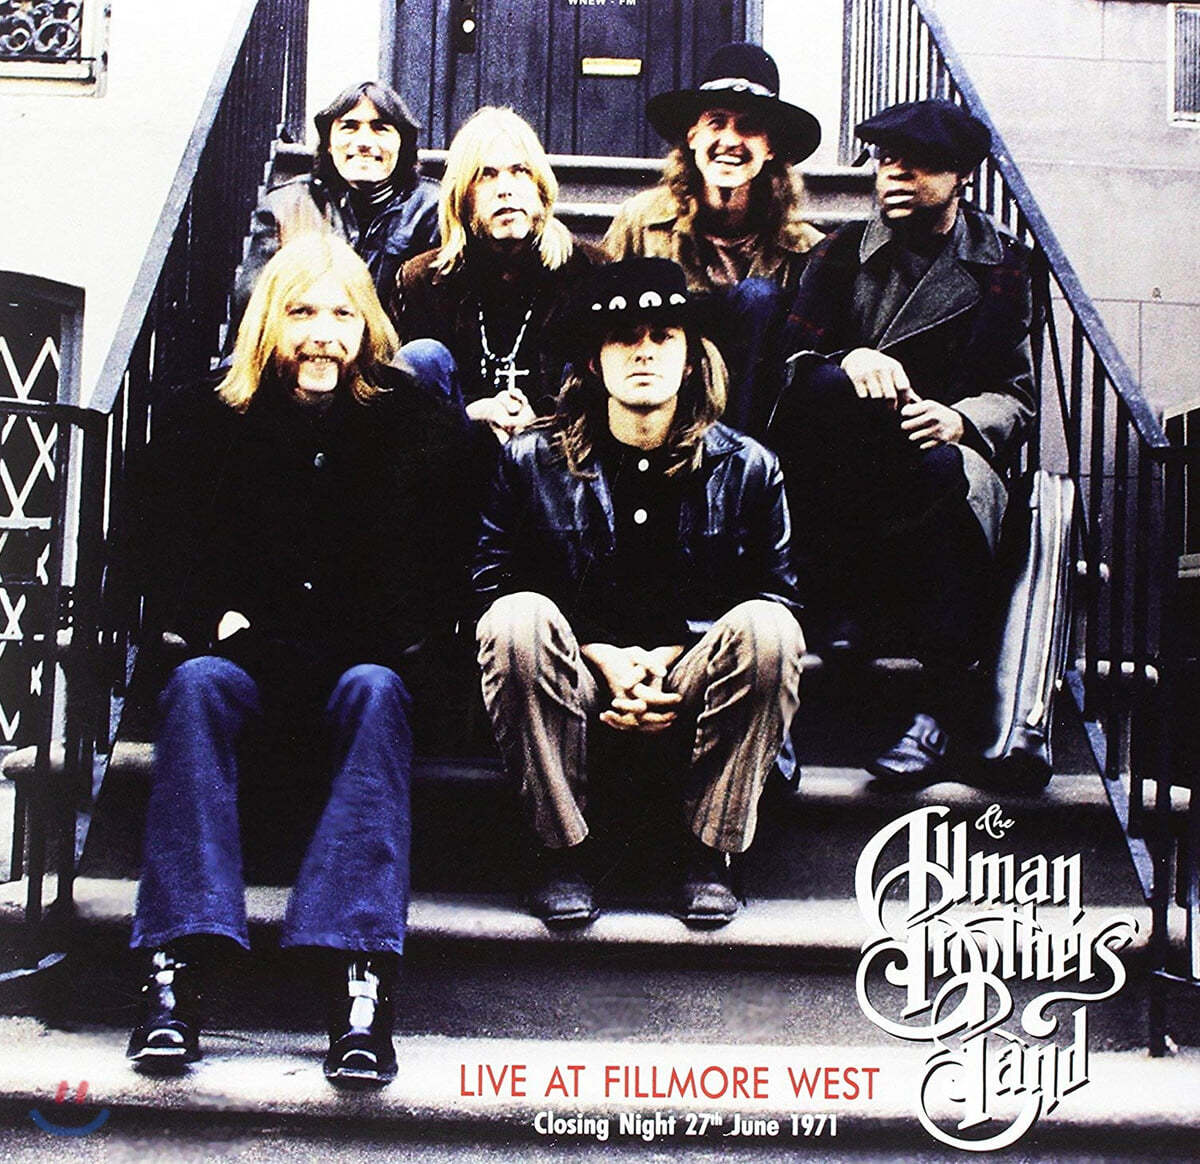 The Allman Brothers Band (올맨 브라더스 밴드) - Live At Fillmore West Closing Night 27th June 1971 [2LP] 